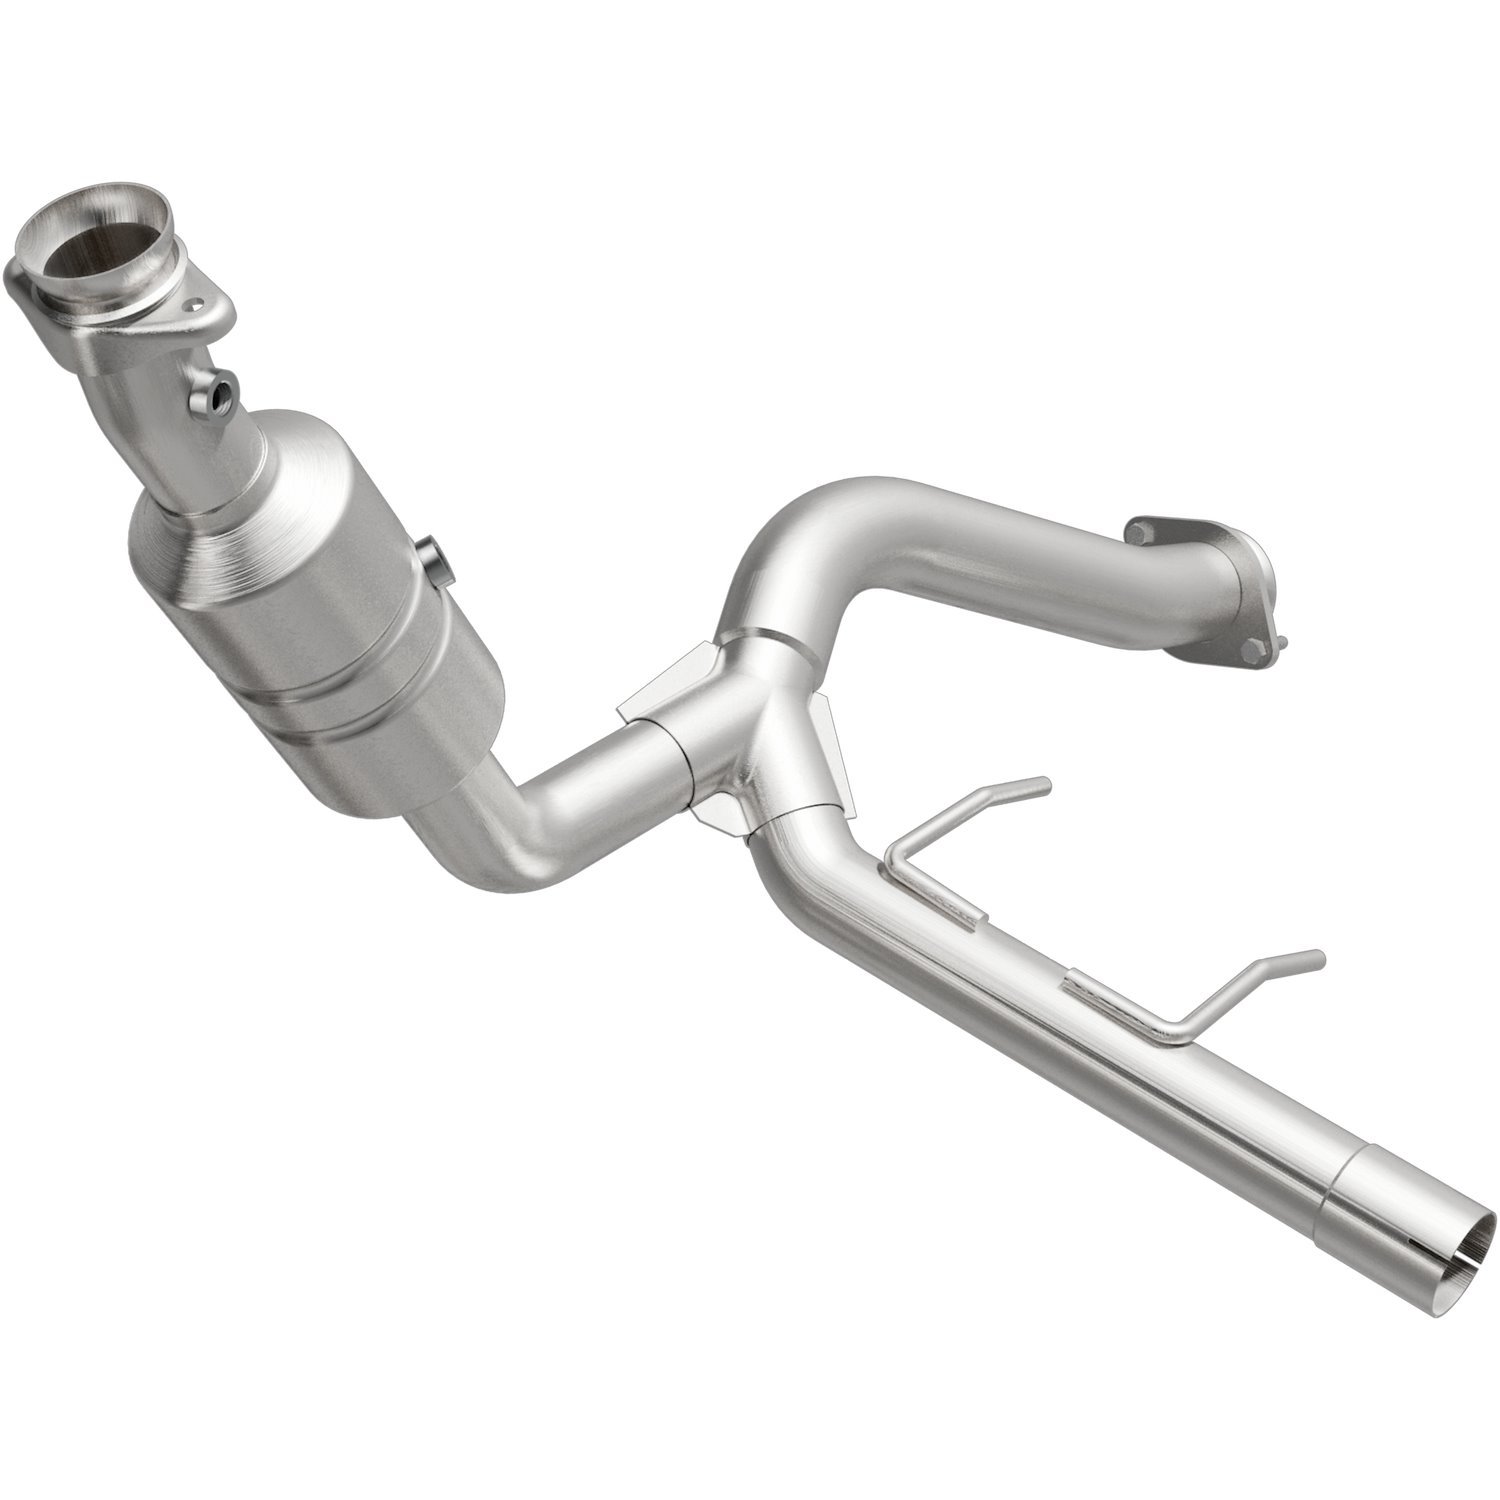 OEM Grade Federal / EPA Compliant Direct-Fit Catalytic Converter 52418